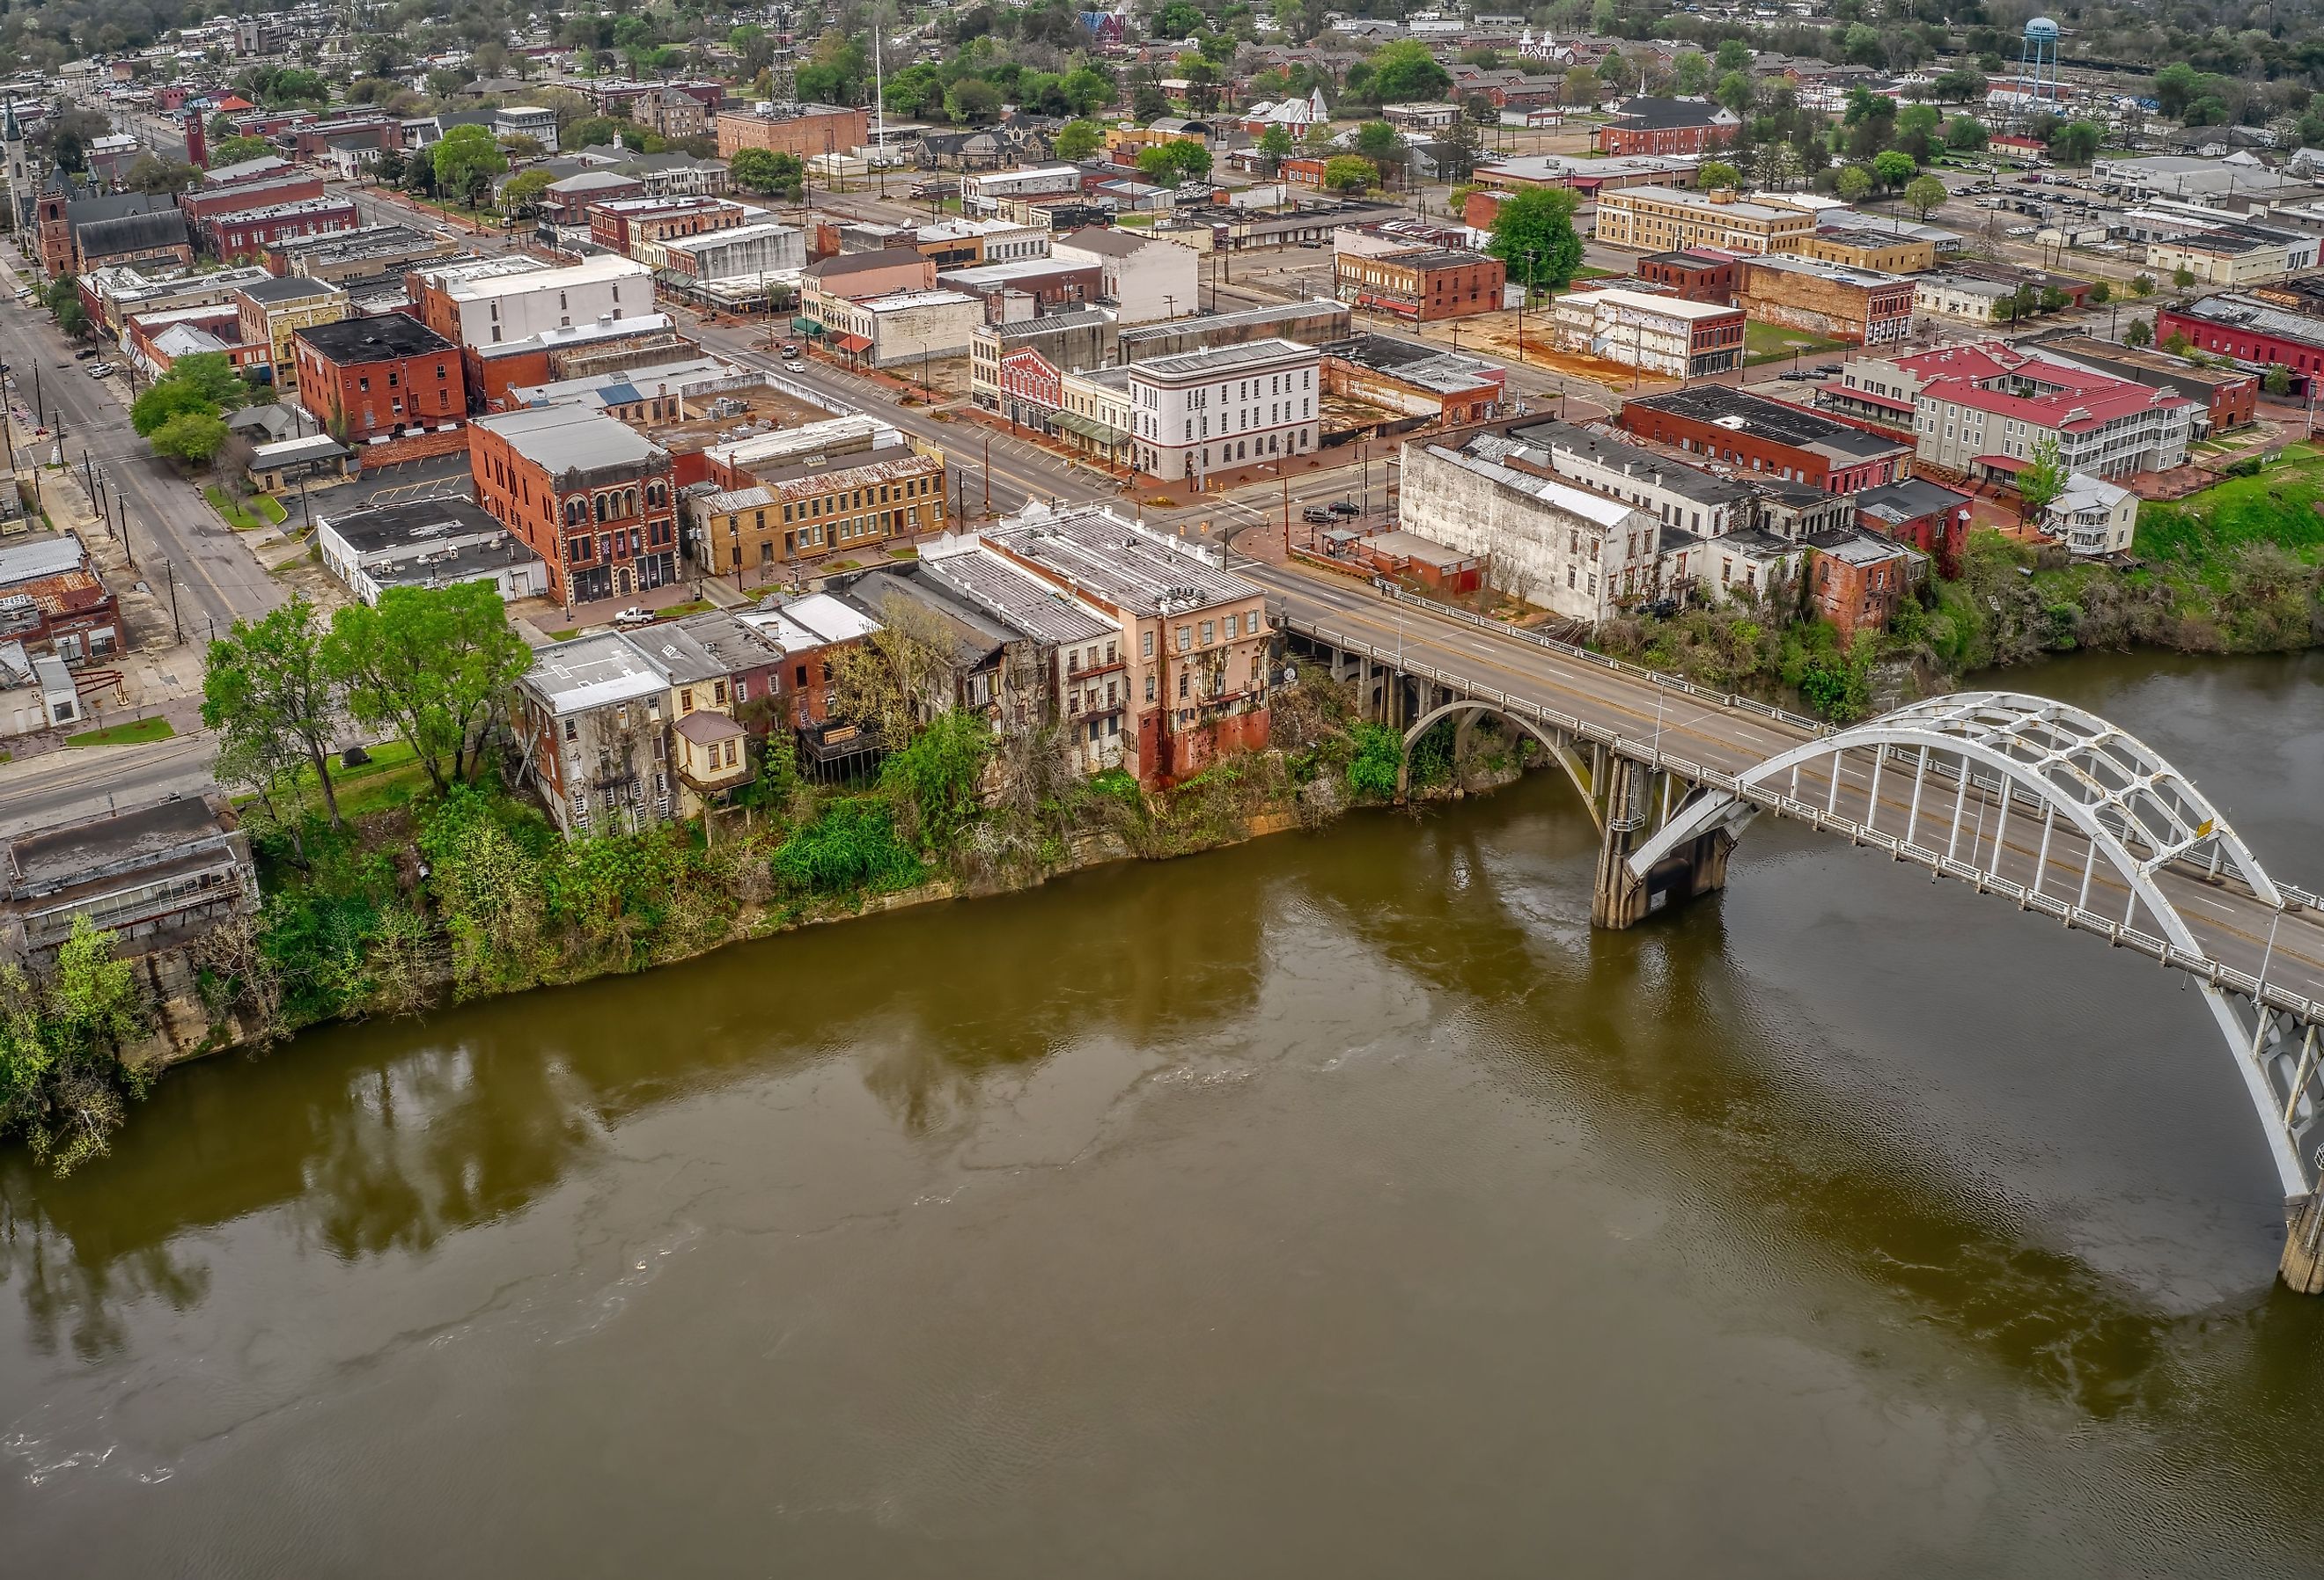 Overlooking Selma, Alabama, showcasing the town's historic architecture, streets, and the iconic bridge spanning over the river.